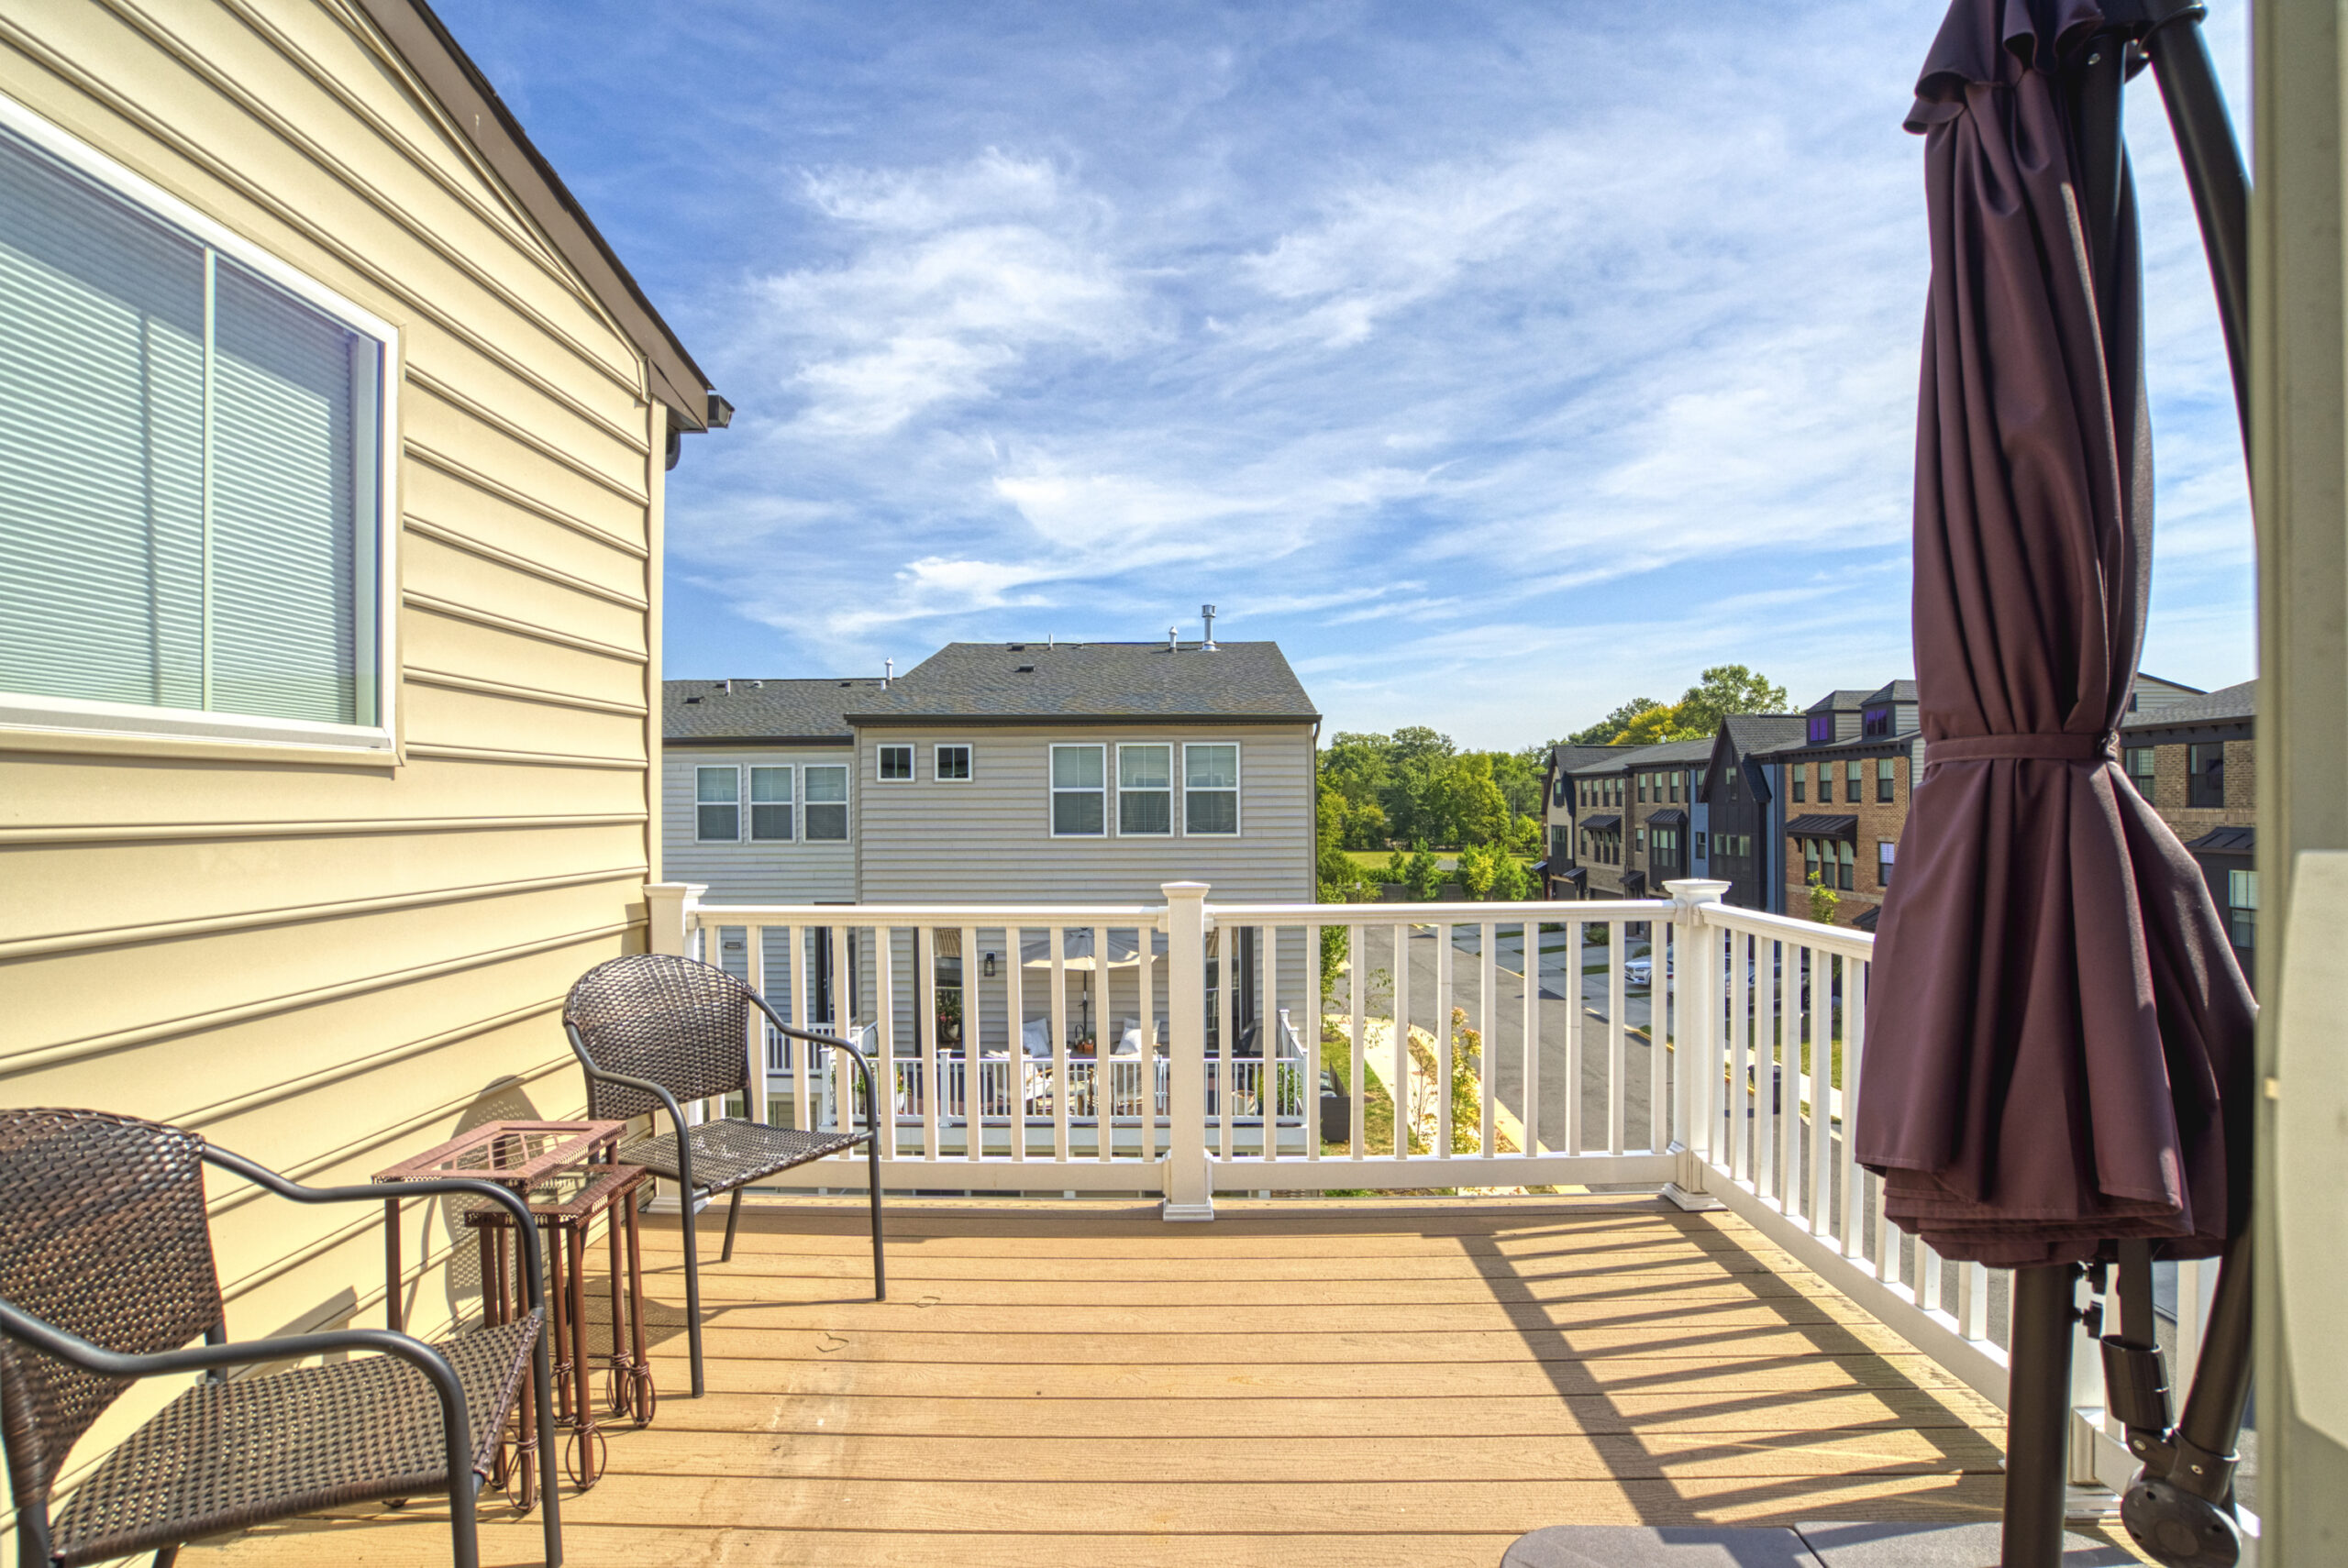 Professional exterior photo of 8109 Zoe Place, Alexandria, VA - Showing the private top floor balcony off the primary suite